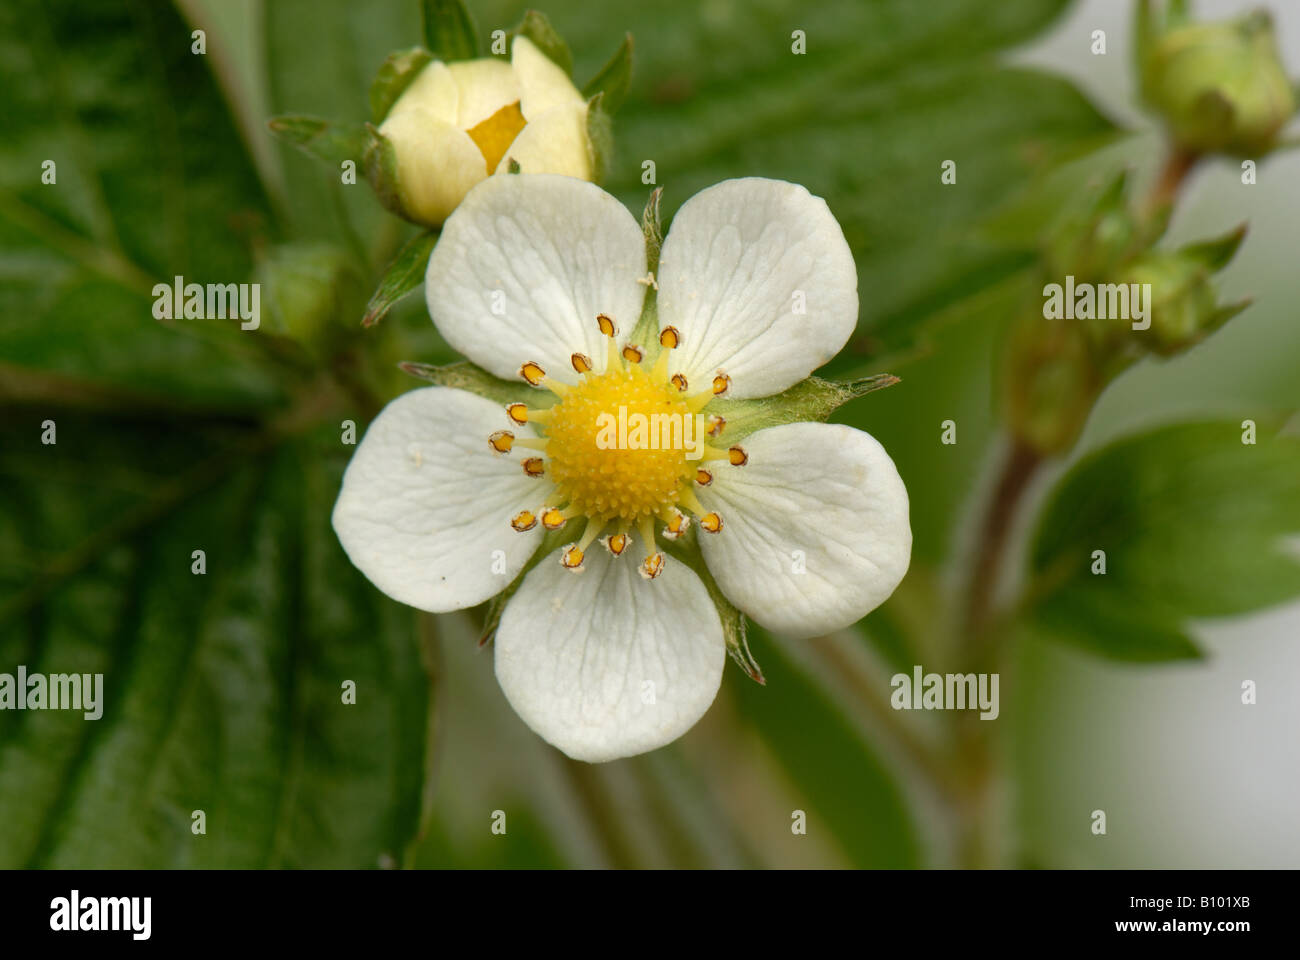 Wild strawberry Fragaria vesca flower showing petals and yellow centre Stock Photo